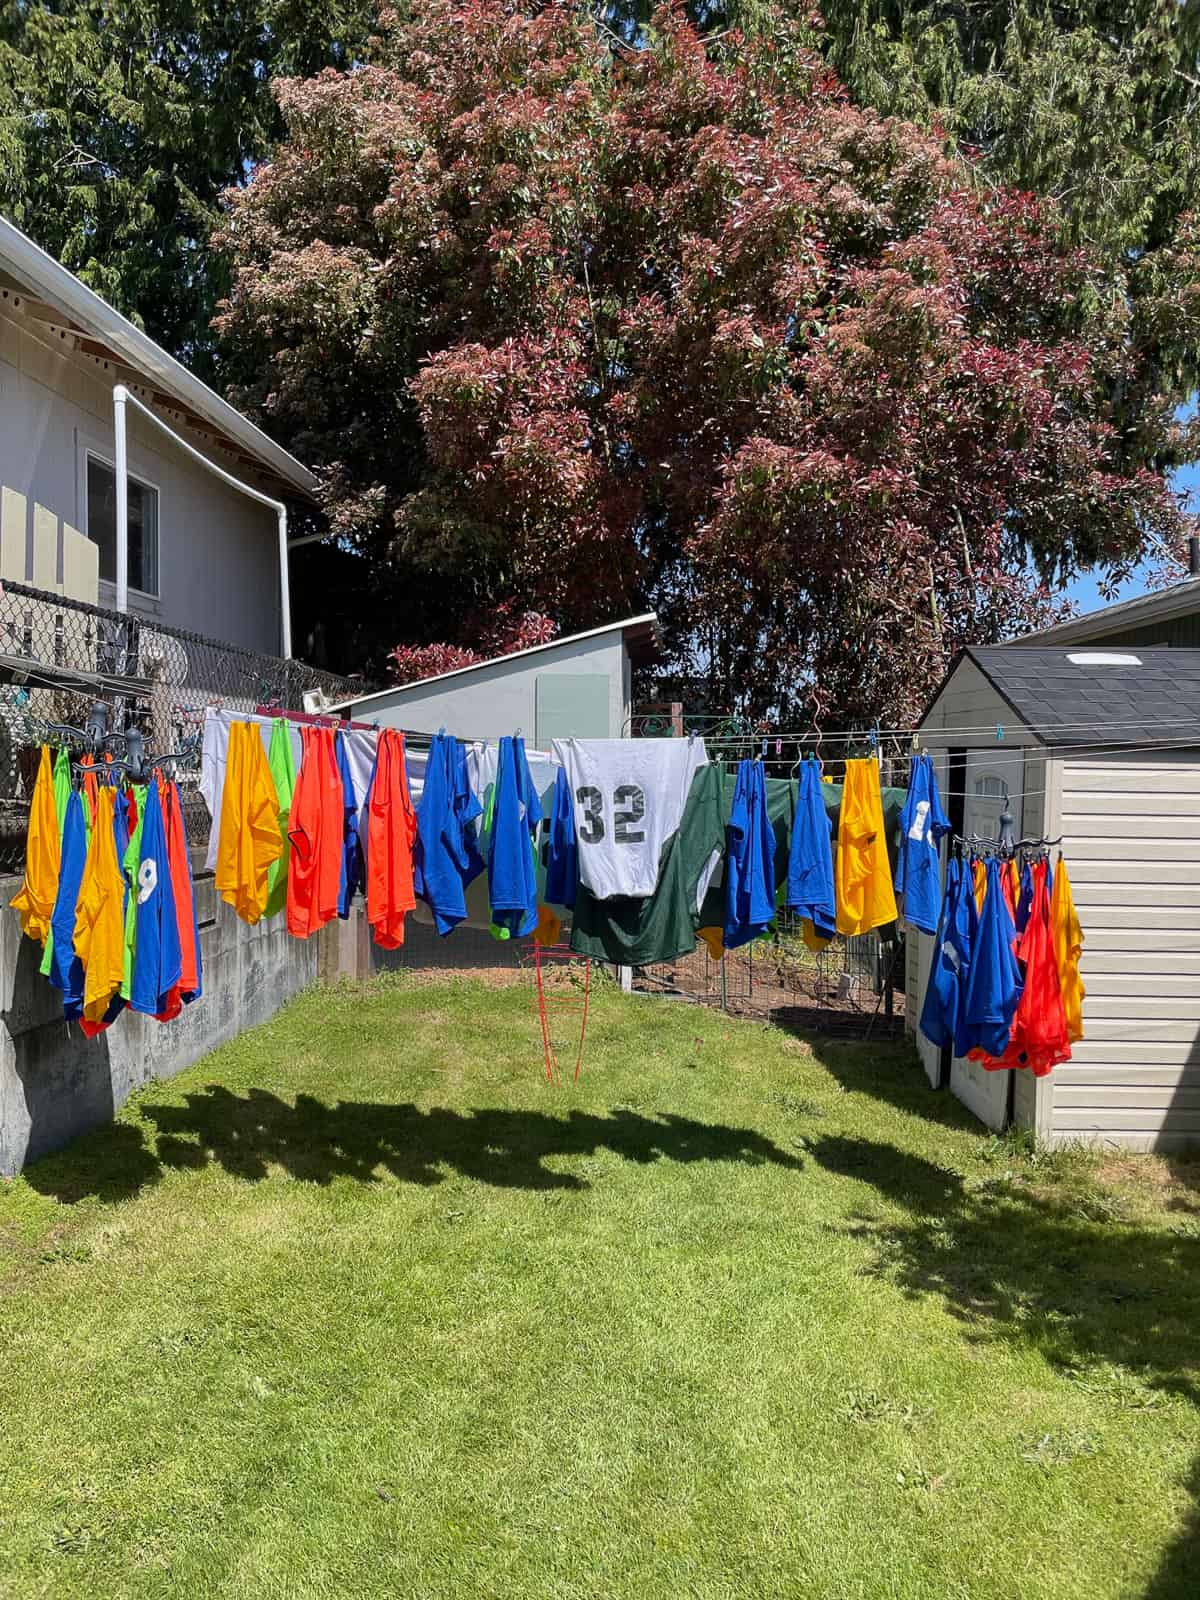 sports jerseys on a clothesline in the sun.